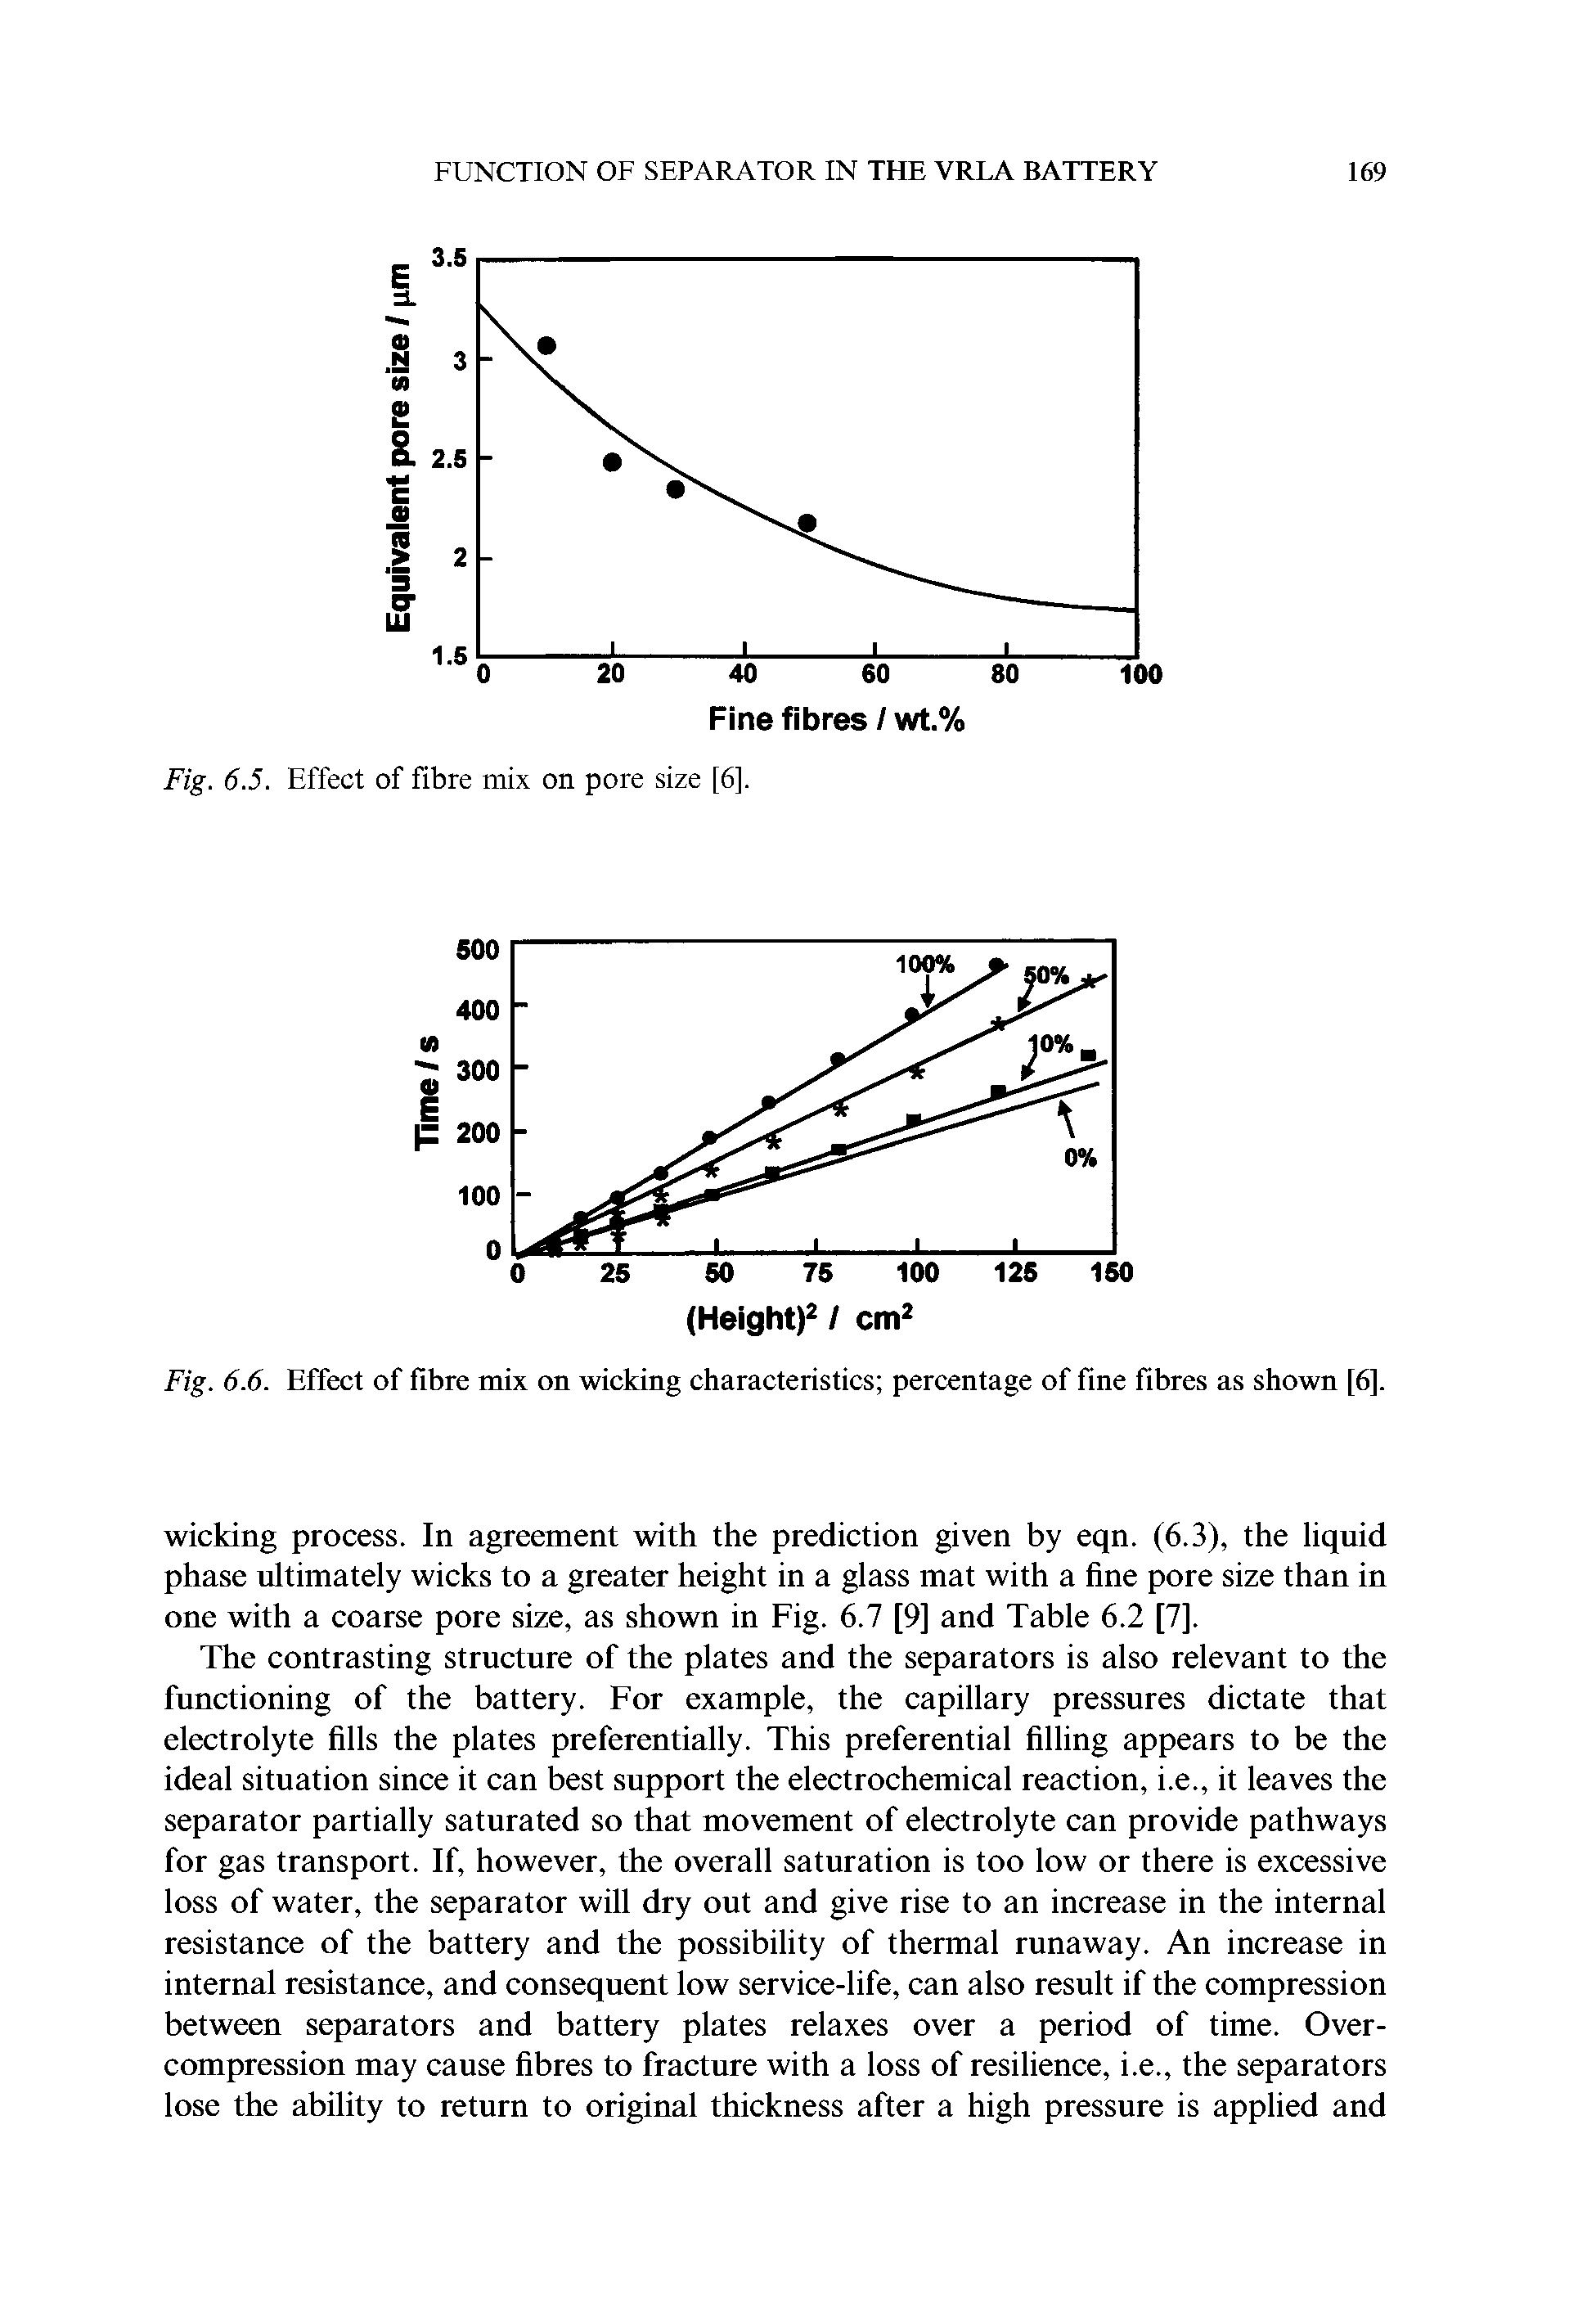 Fig. 6.6. Effect of fibre mix on wicking characteristics percentage of fine fibres as shown [6].